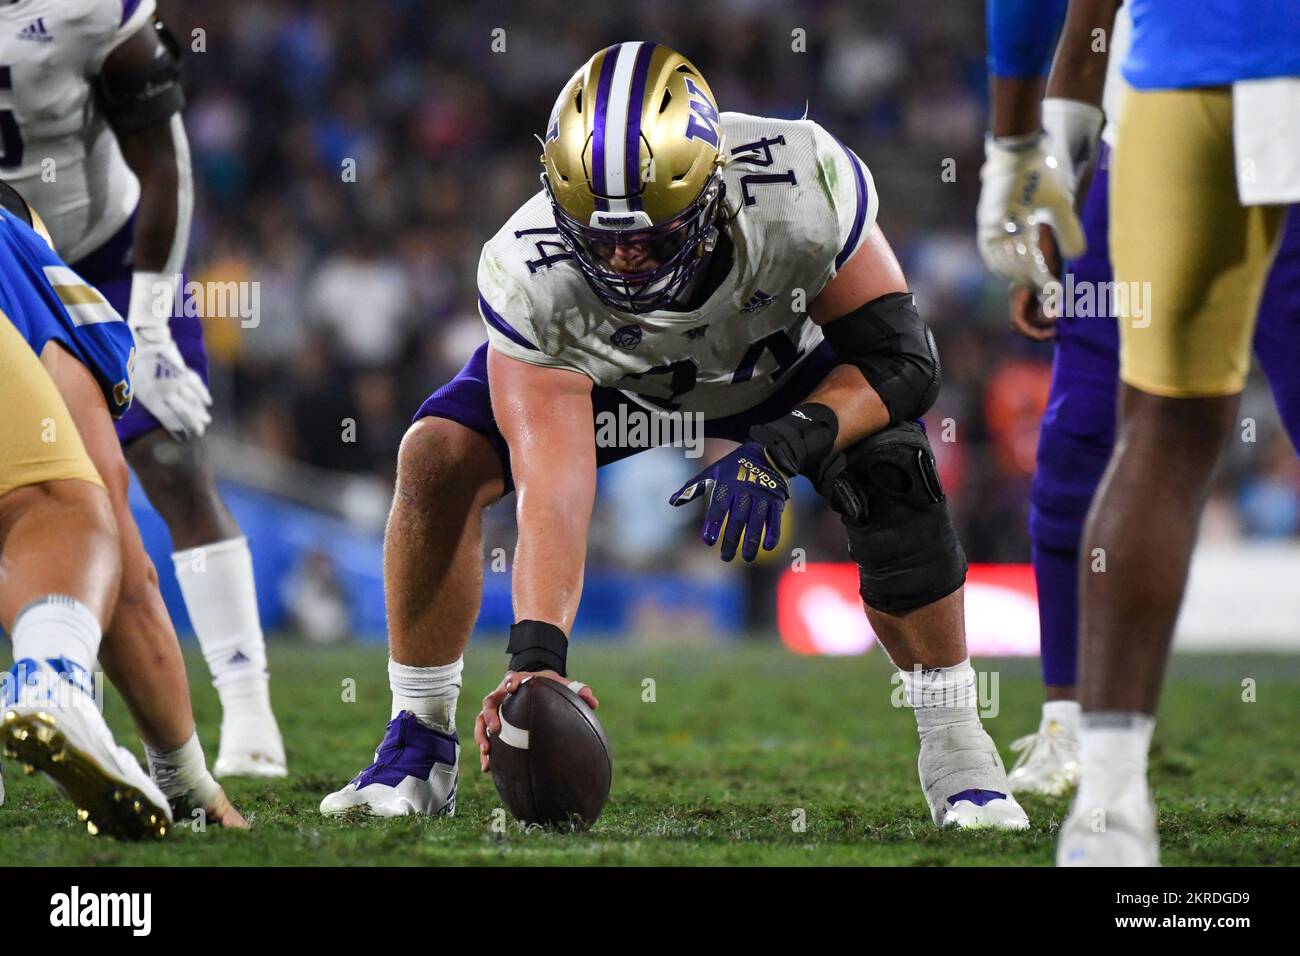 Washington Huskies offensive lineman Corey Luciano (74) during an NCAA football game against the UCLA Bruins, Friday, Sep. 30, 2022, in Pasadena, Cali Stock Photo